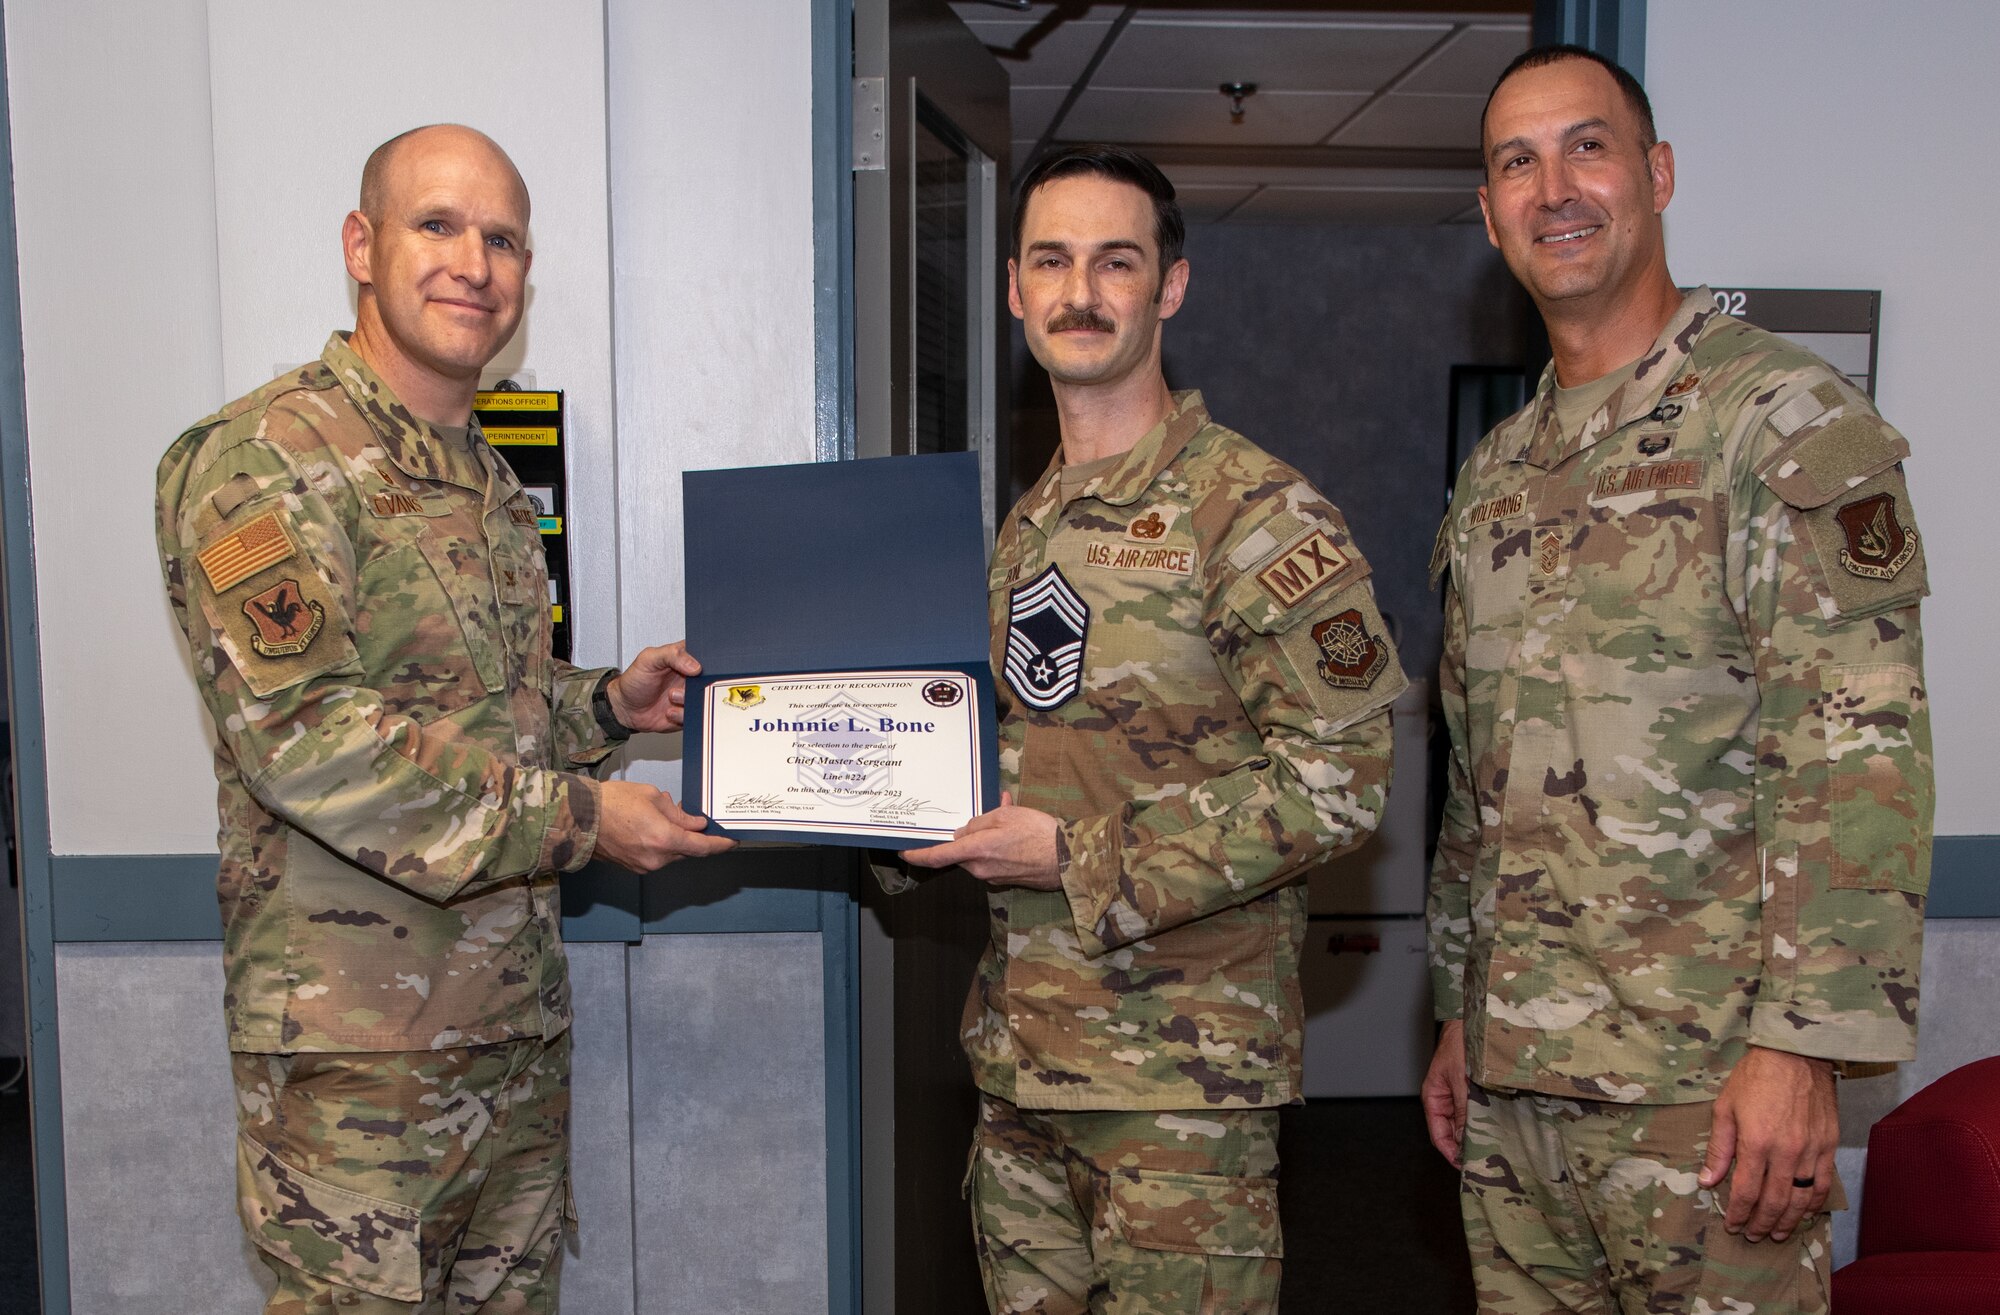 Three U.S. Air Force service members pose with a certificate.